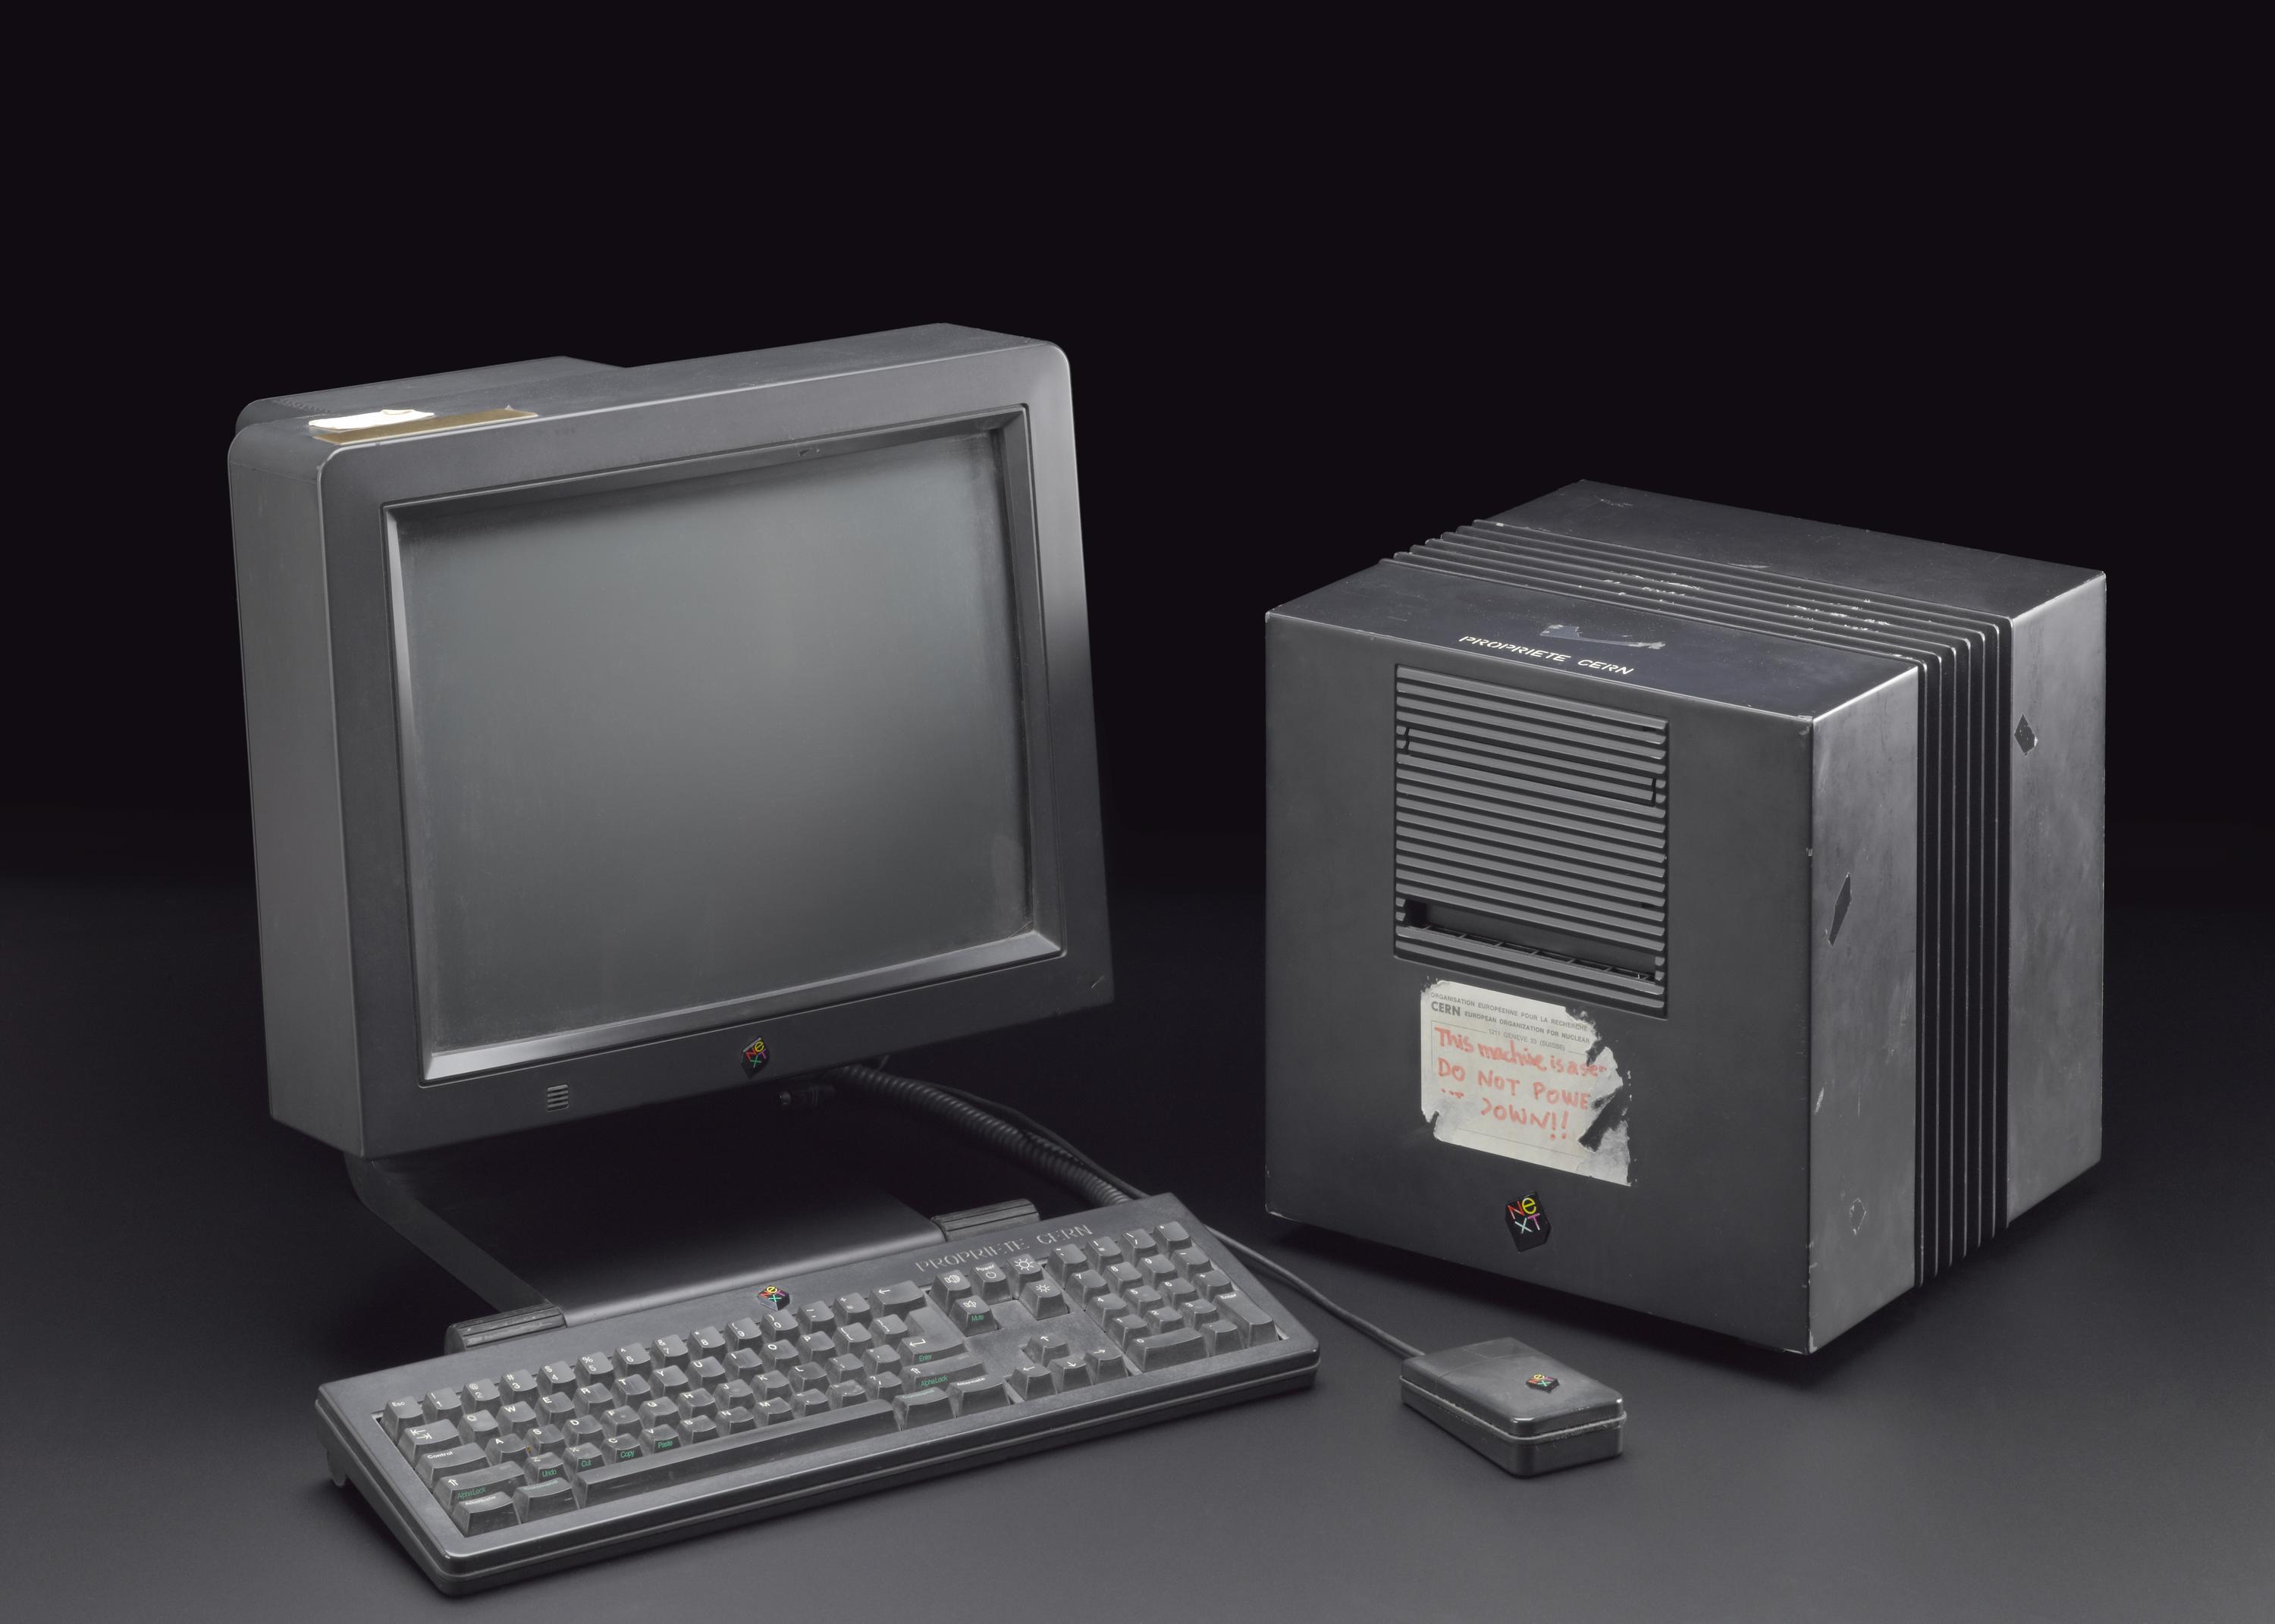 "NeXTcube," a NeXT computer, including screen, keyboard and mouse, made by NeXT, Redwood City, California, United States, 1990. Used by Tim Berners-Lee to design the World Wide Web, at CERN, 1990.